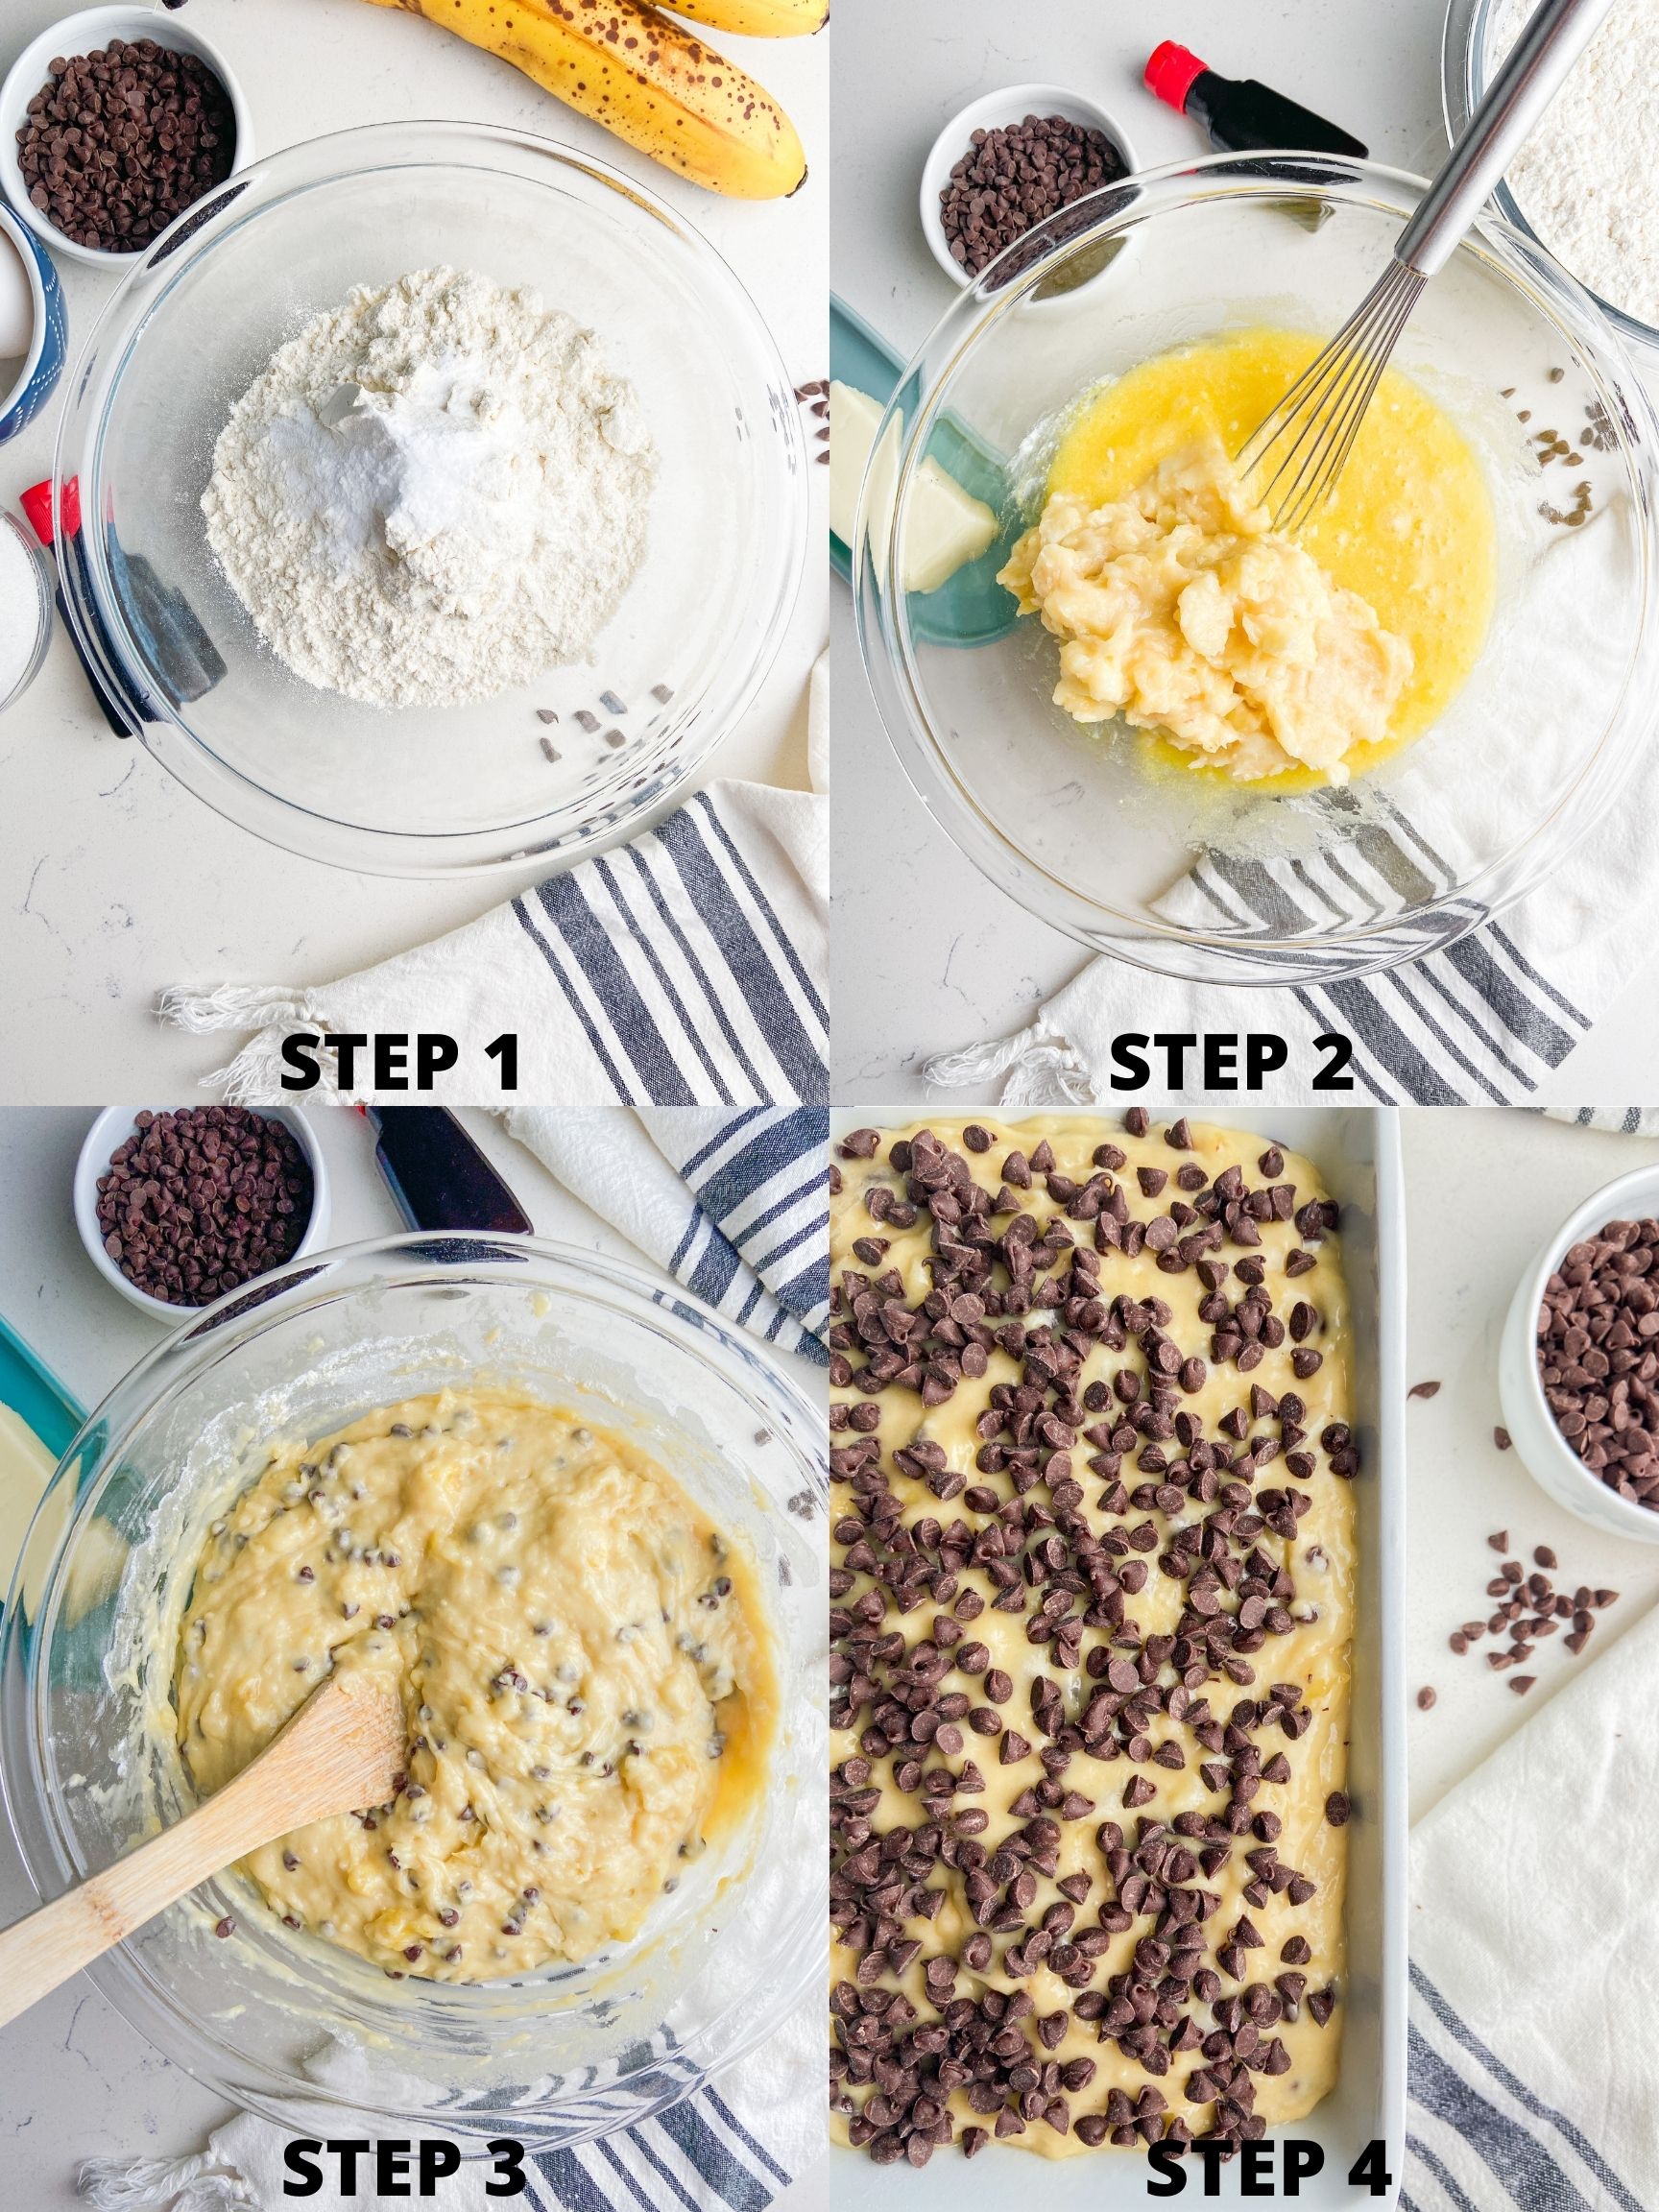 Step by step photos showing how to make chocolate banana bread. 